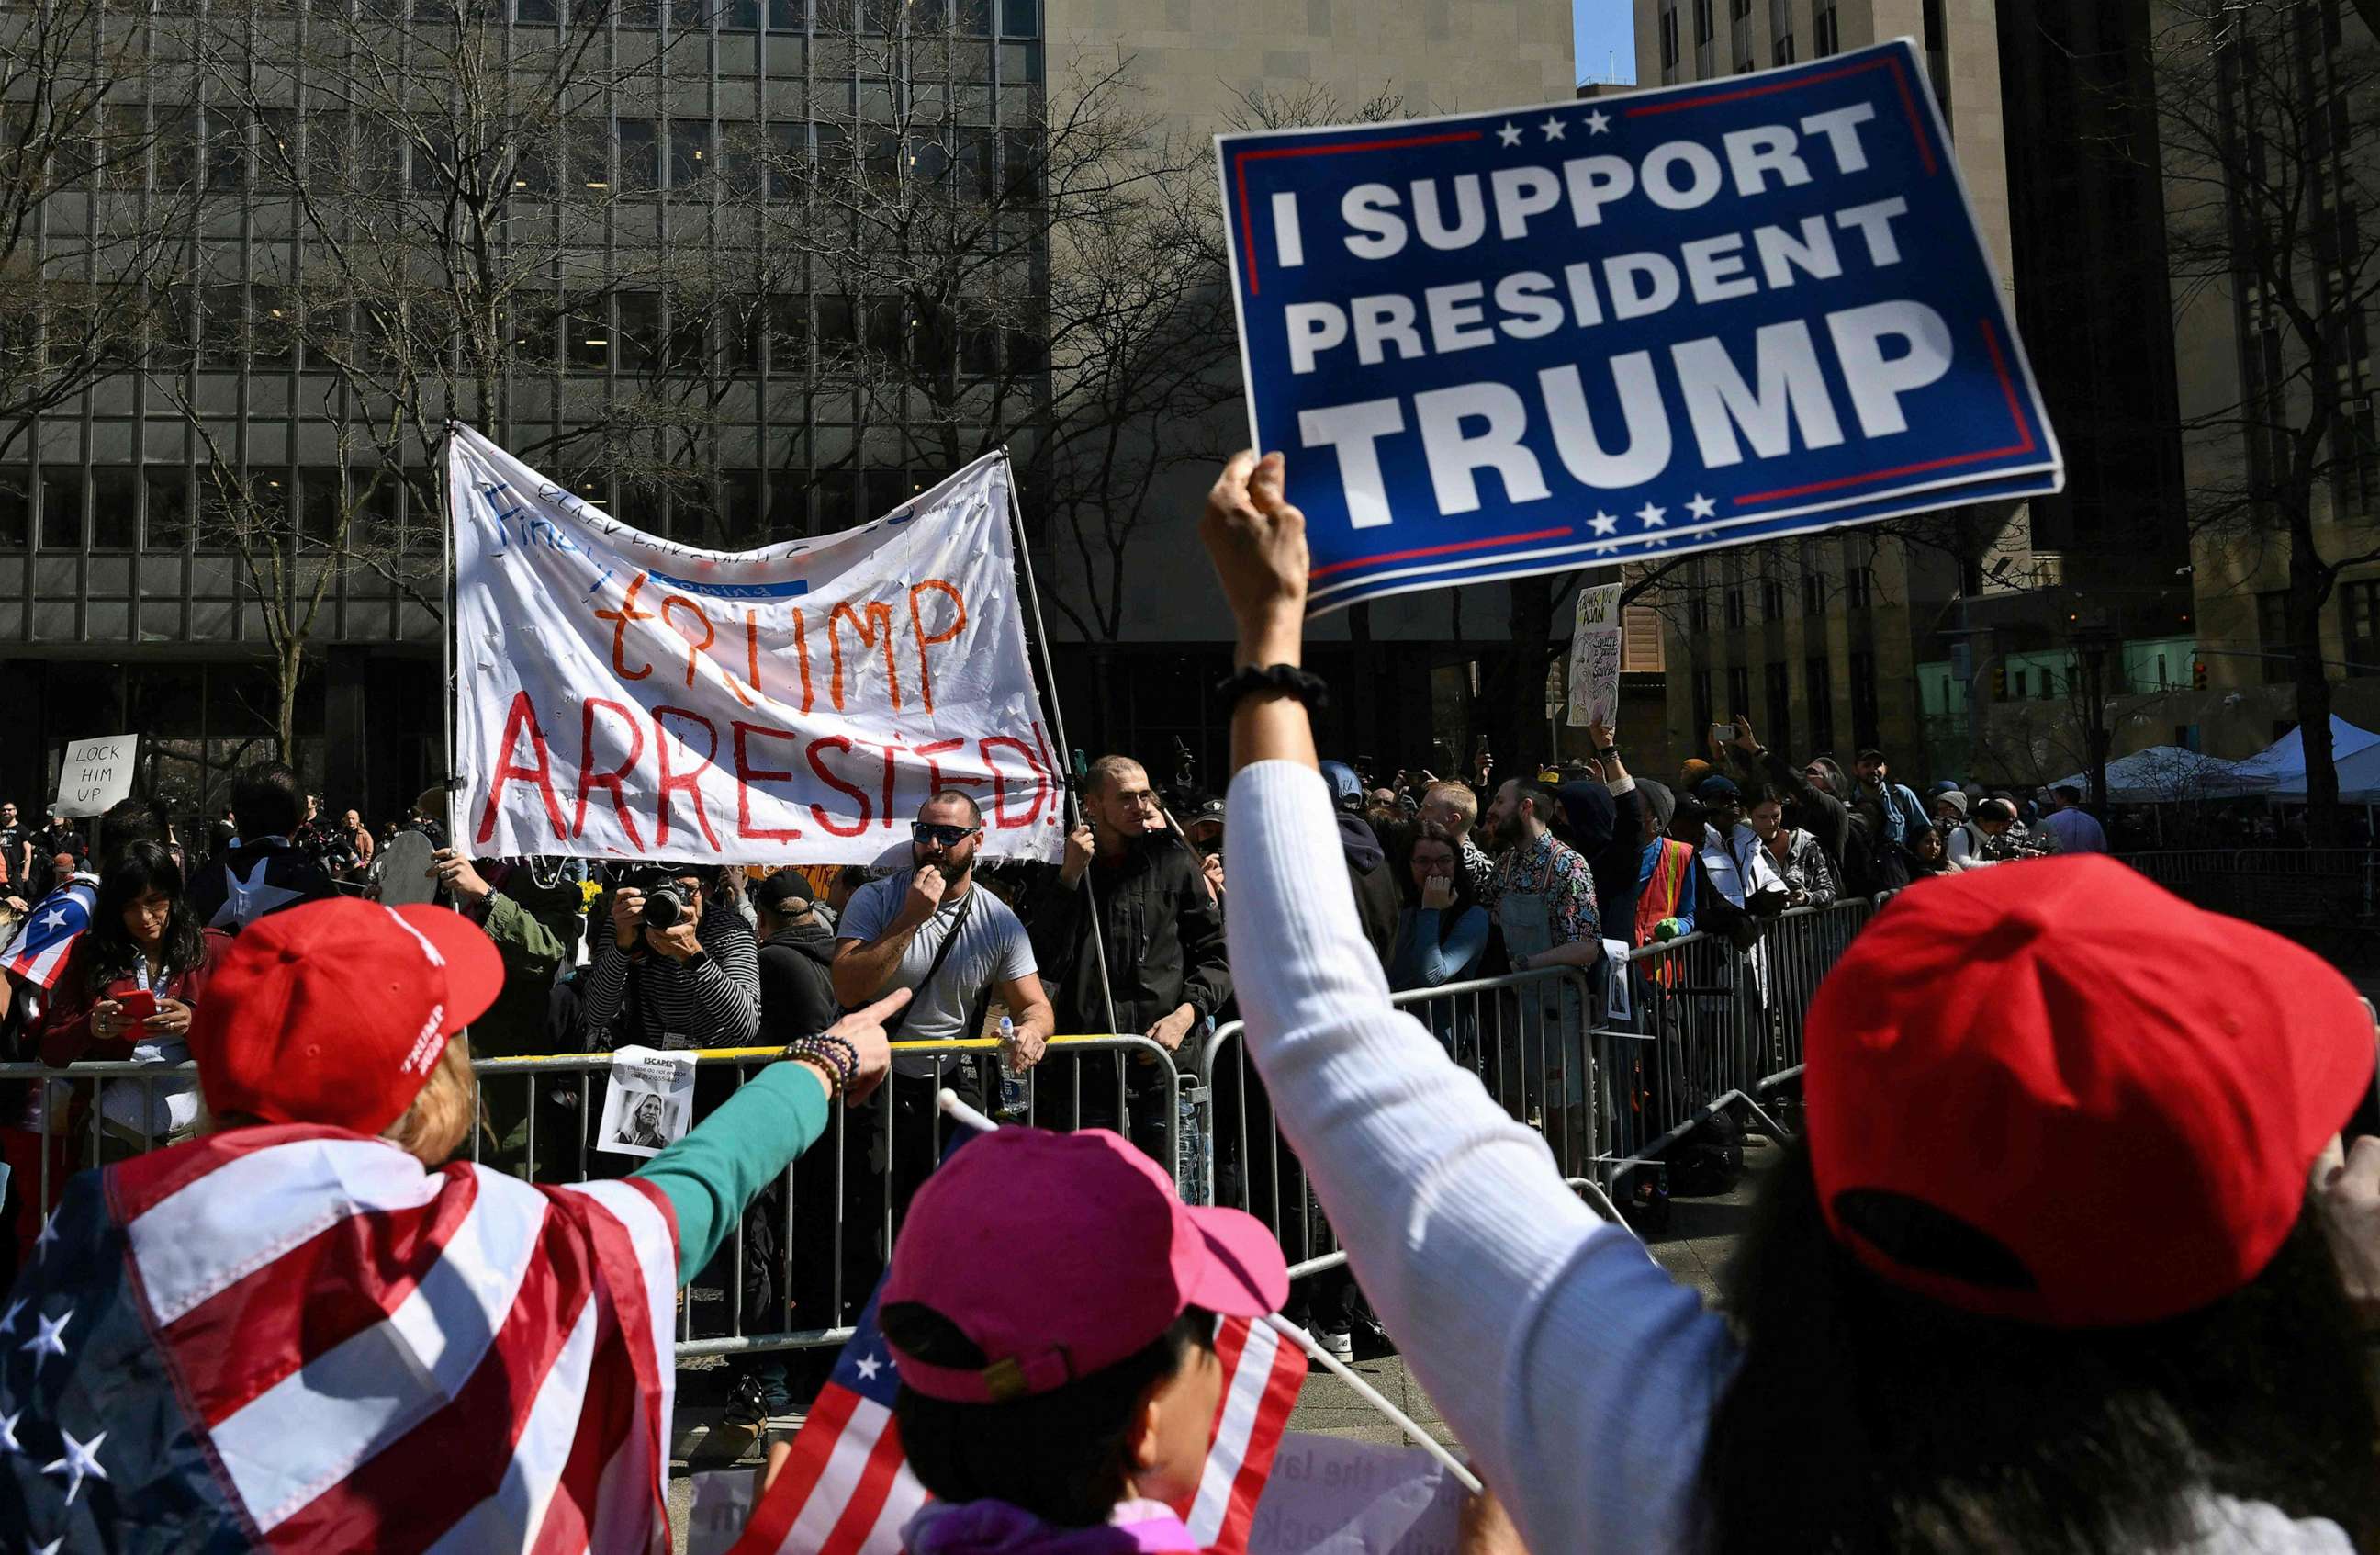 PHOTO: Supporters of former President Donald Trump argue with opponents outside the Manhattan District Attorney's office in New York City on April 4, 2023, ahead of Trump's expected appearance before a New York judge to answer criminal charges.